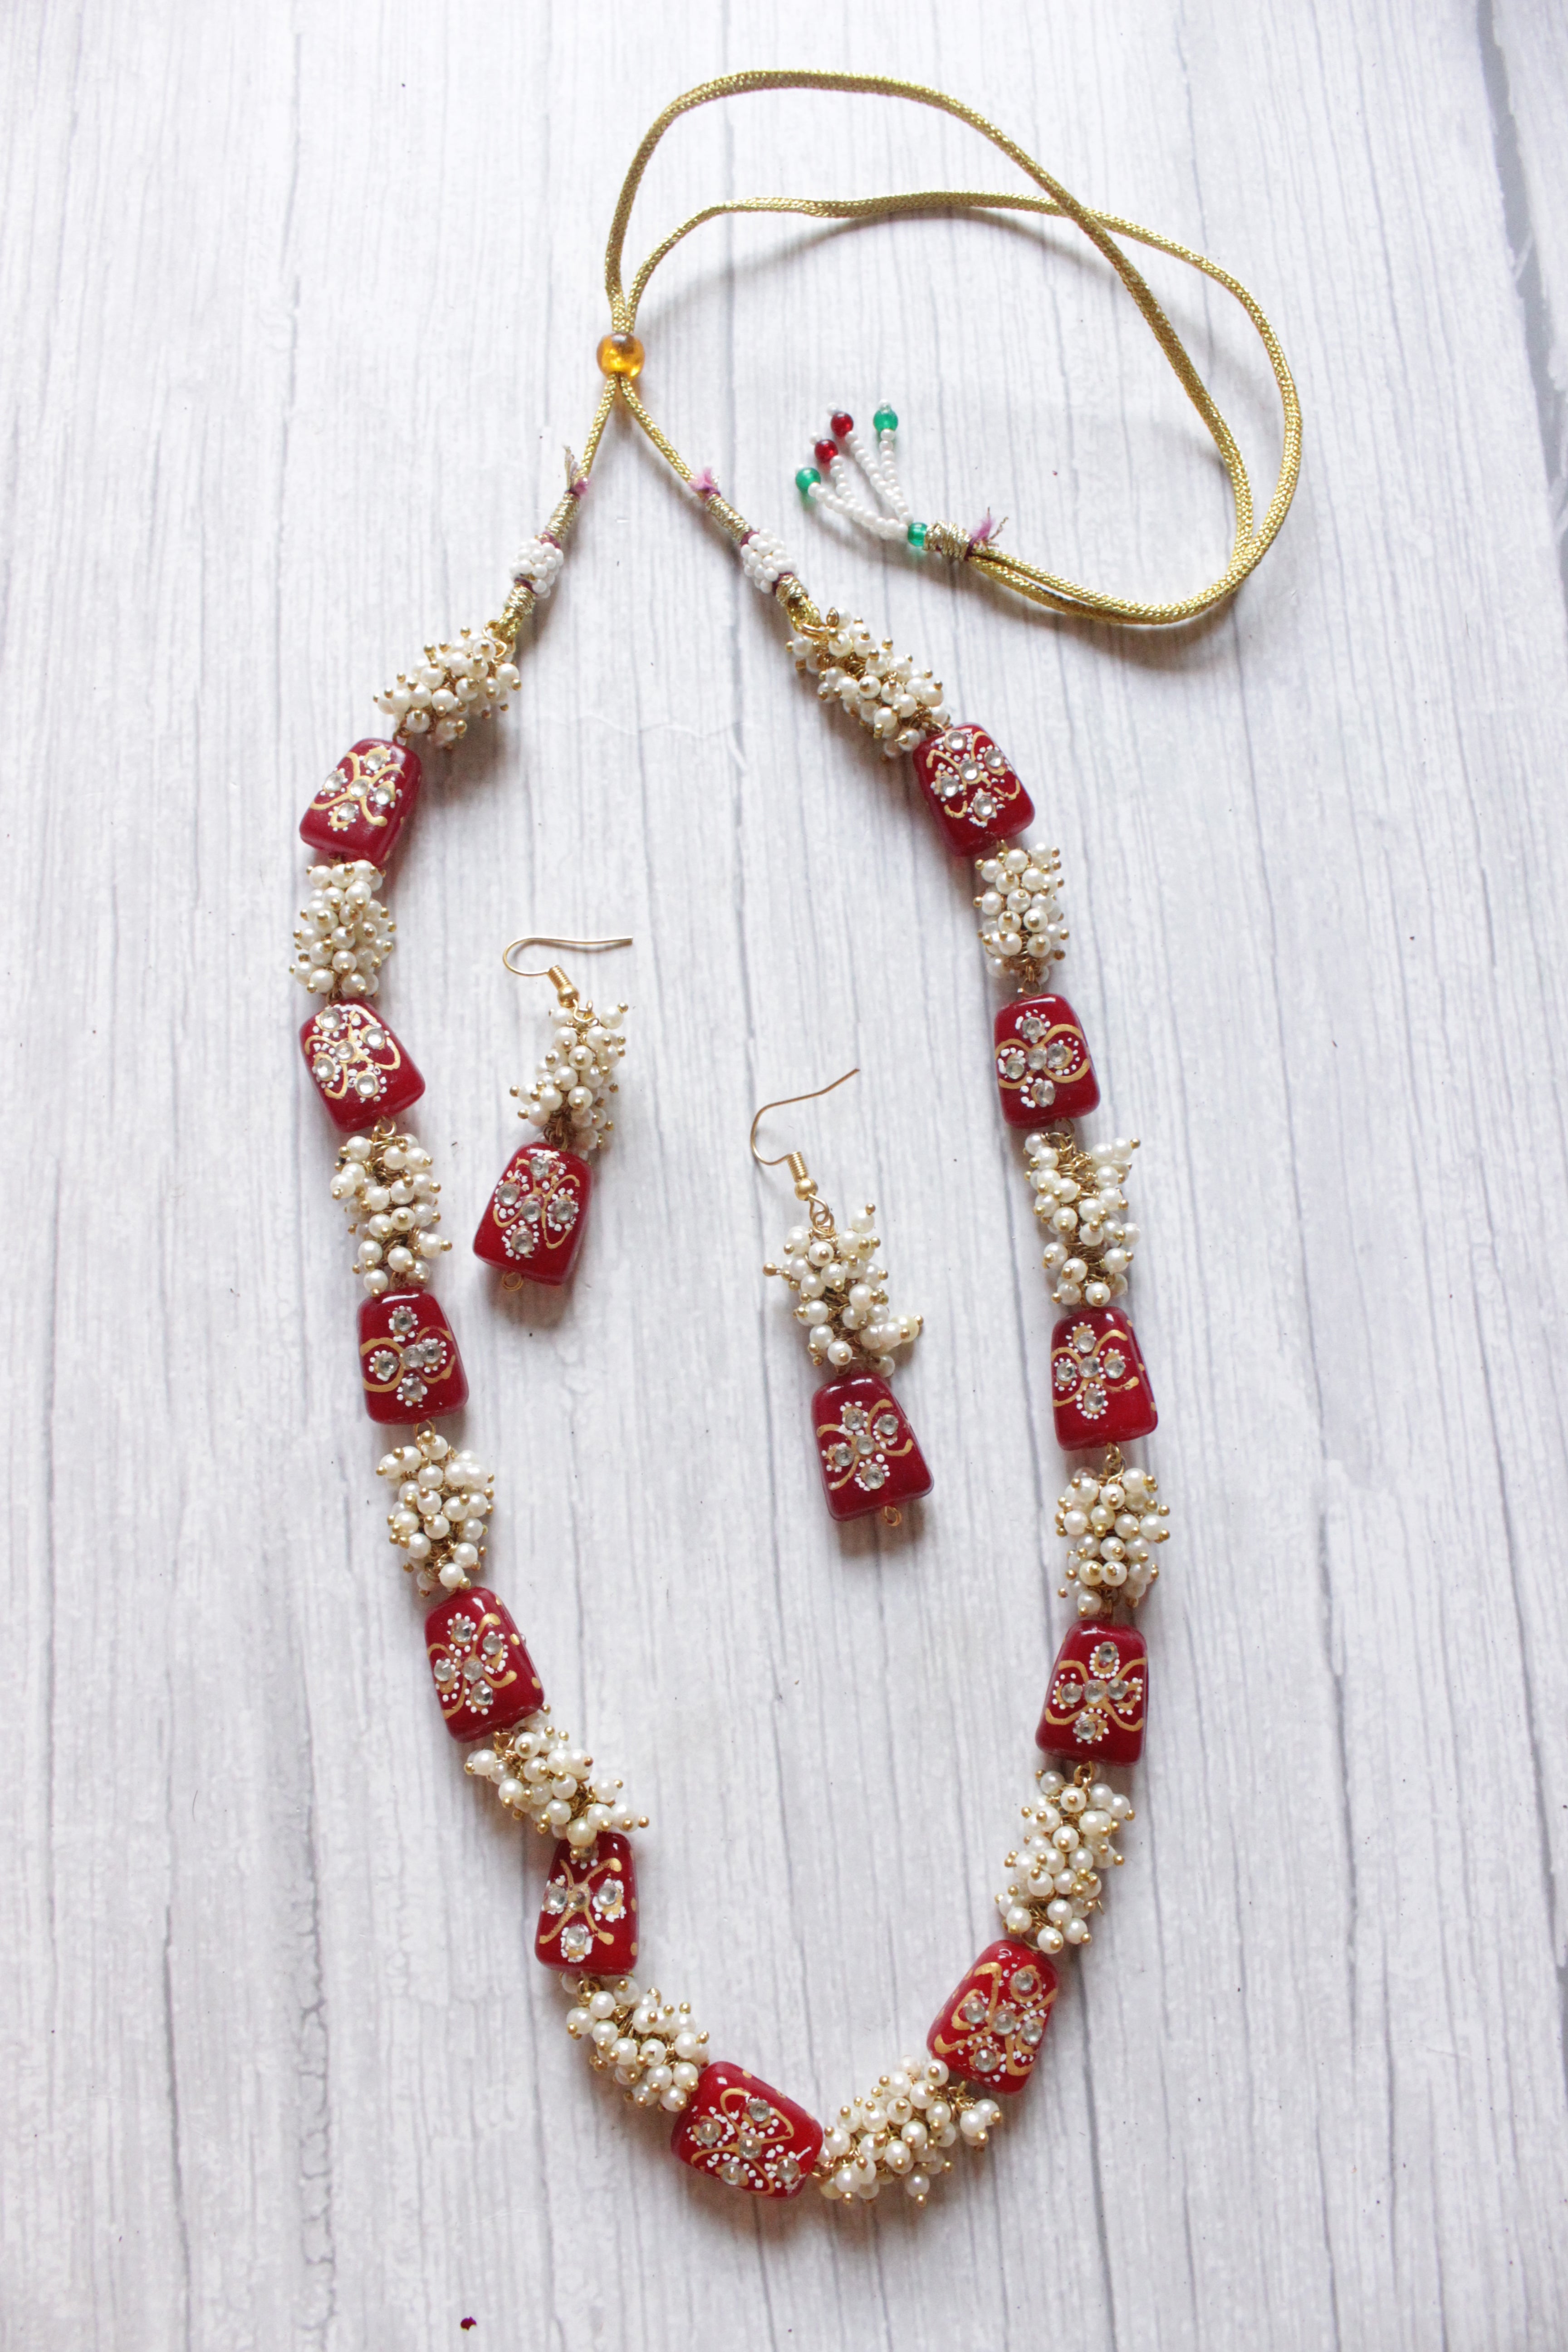 Meenakari Work Red Glass Beads and White Beads Adjustable Length Necklace Set